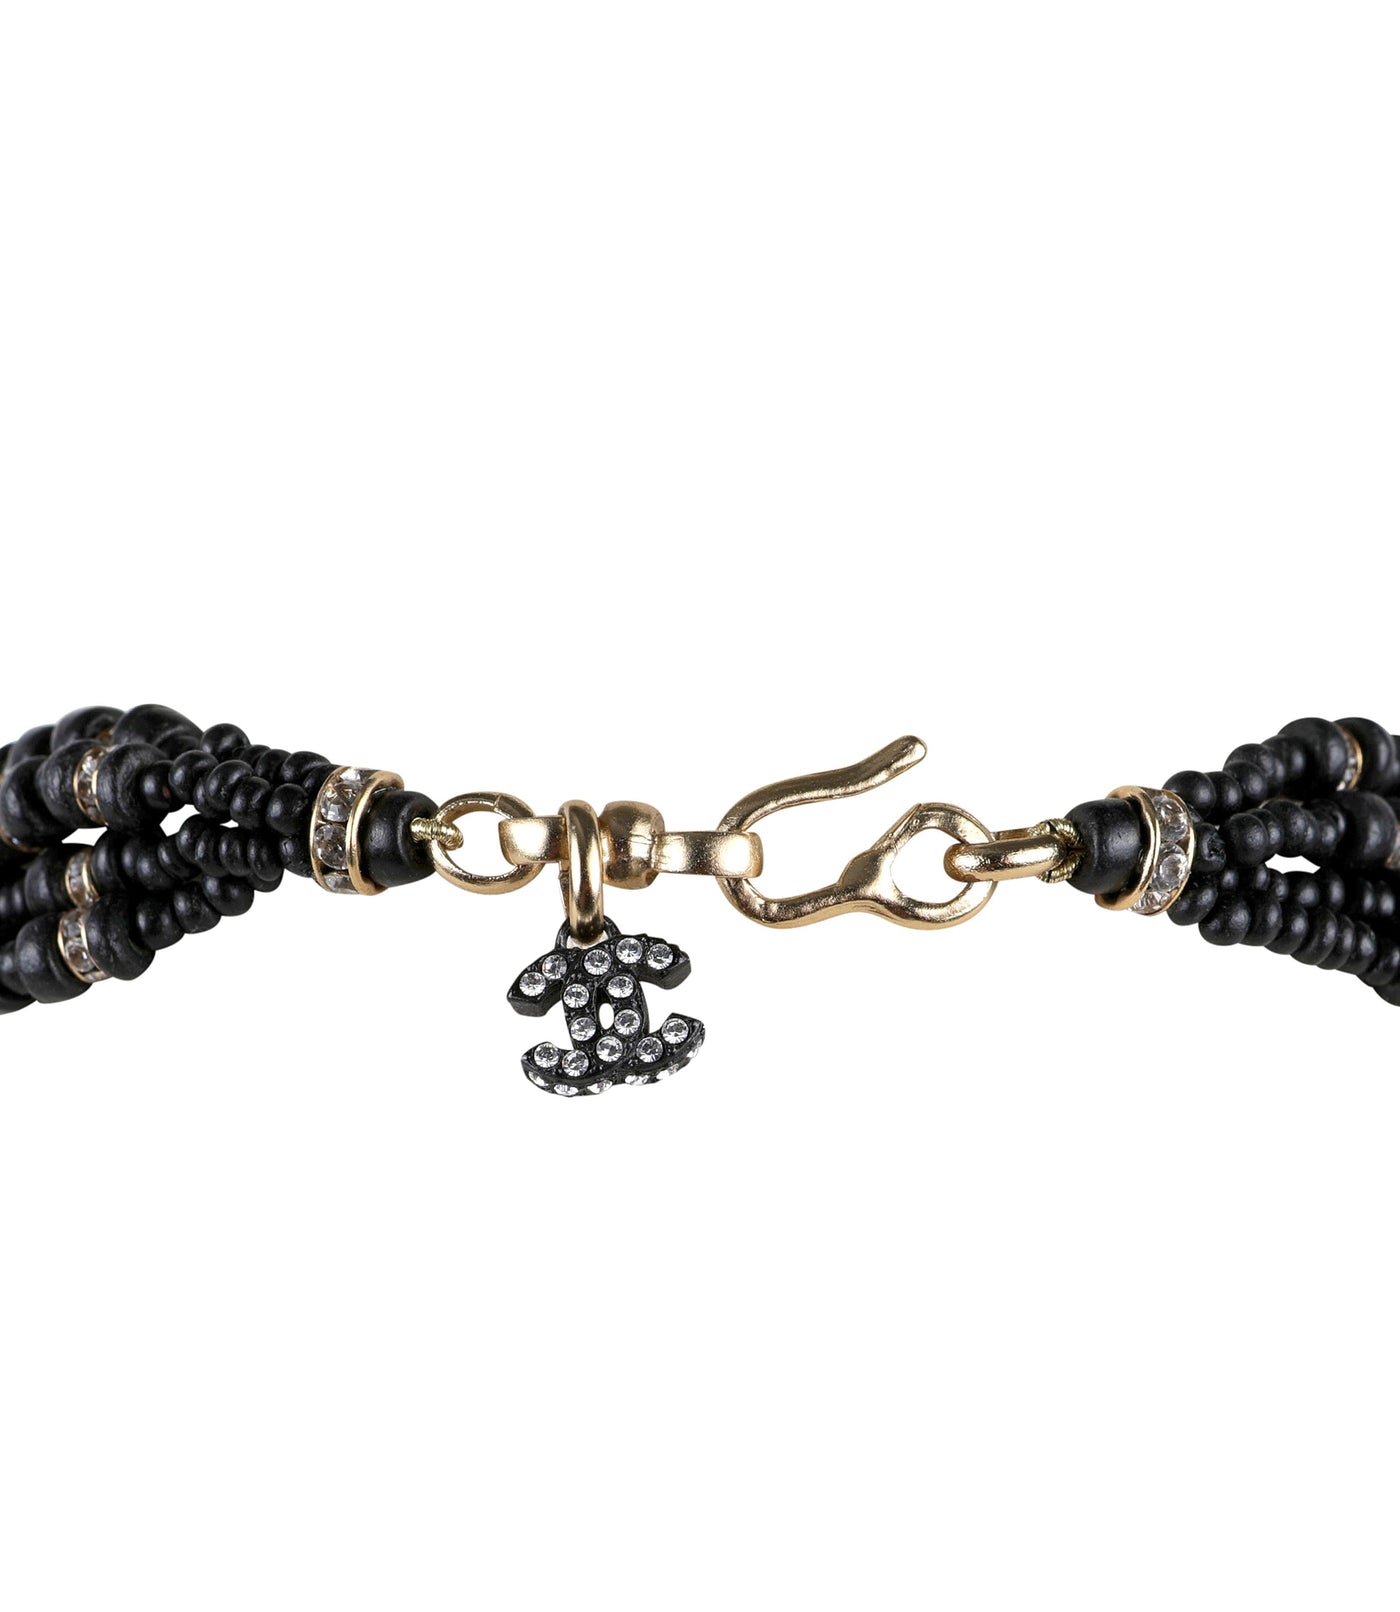 Chanel Black Wooden Bead Necklace w/ Crystals & Camellia